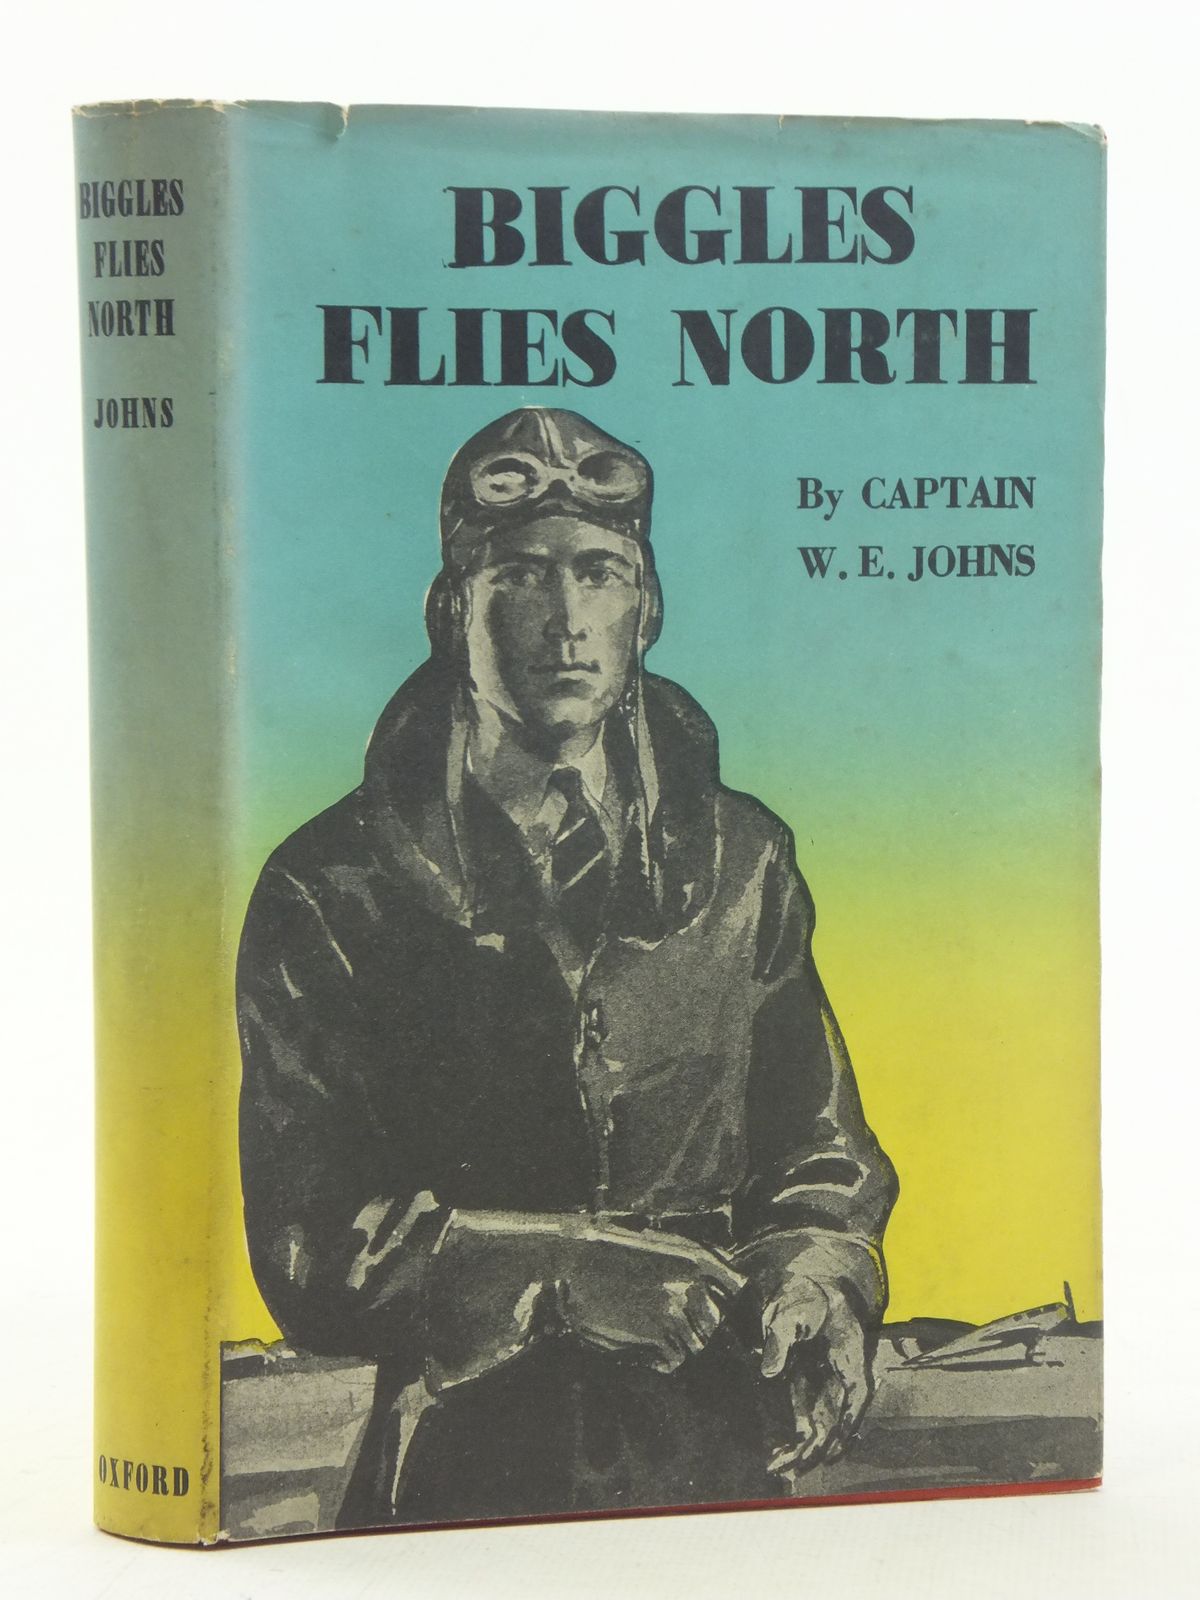 Cover of BIGGLES FLIES NORTH by W.E. Johns